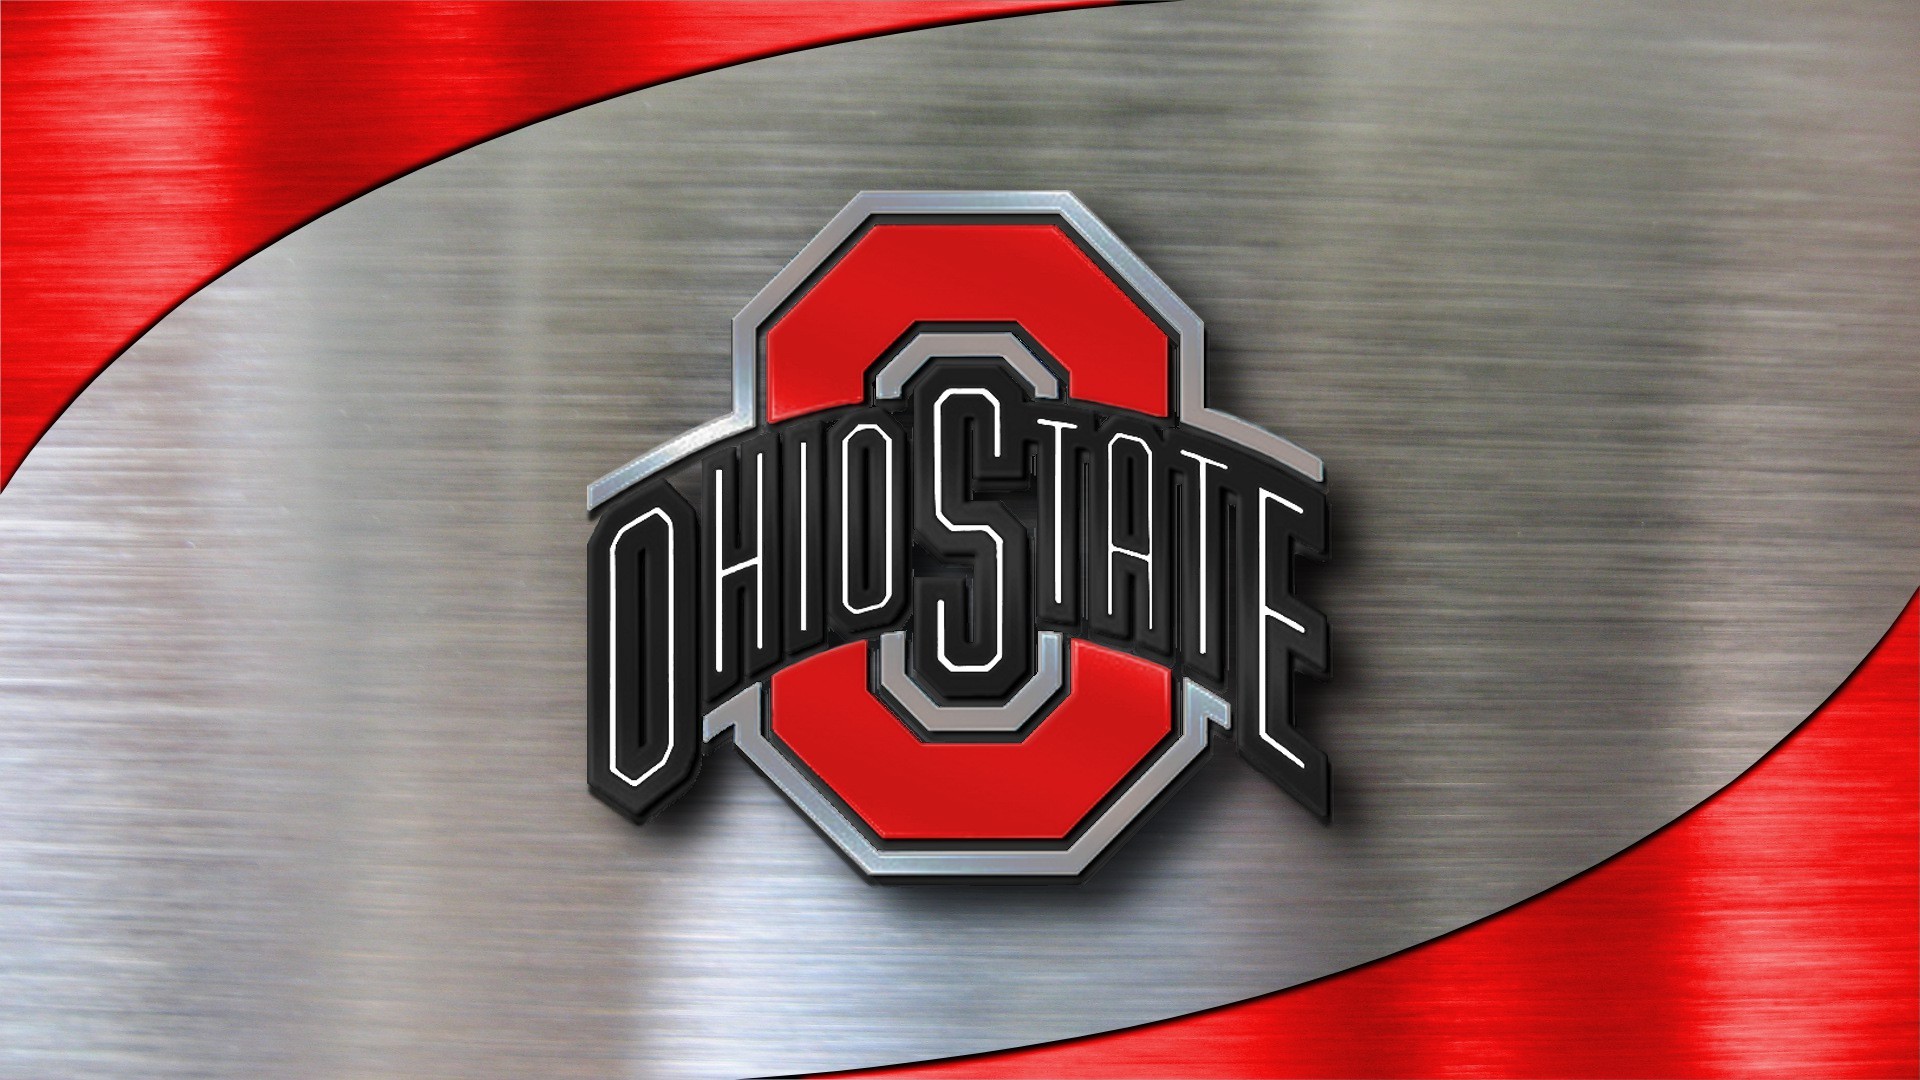 1920x1080 ... Best Ohio State Football Wallpapers Wallpaper Ideas On WorldWarix.Com  Find and Save Ideas about